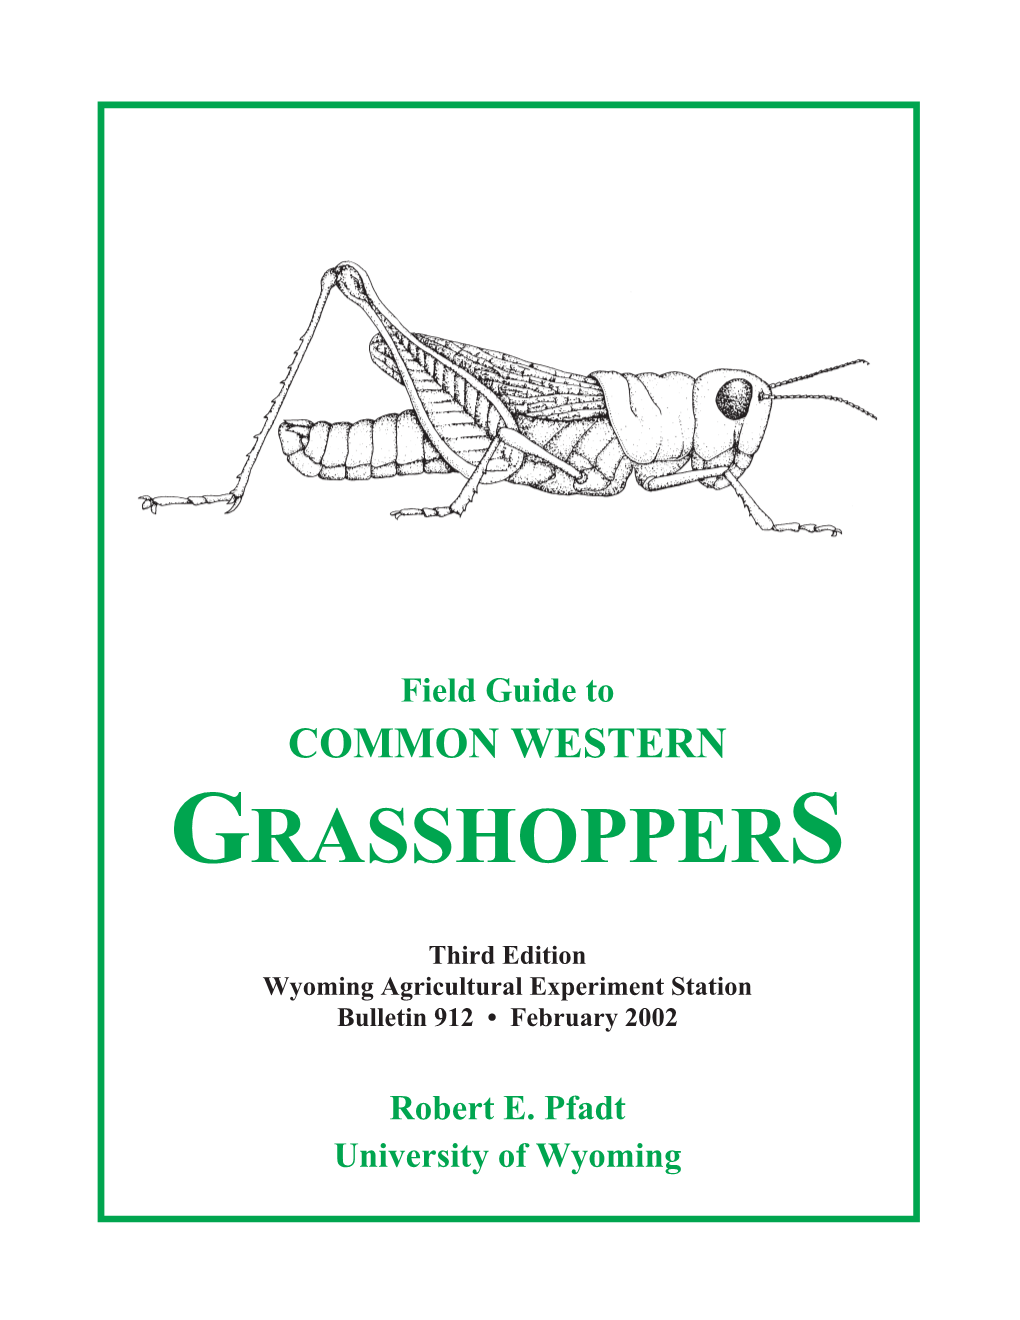 Field Guide to COMMON WESTERN GRASSHOPPERS